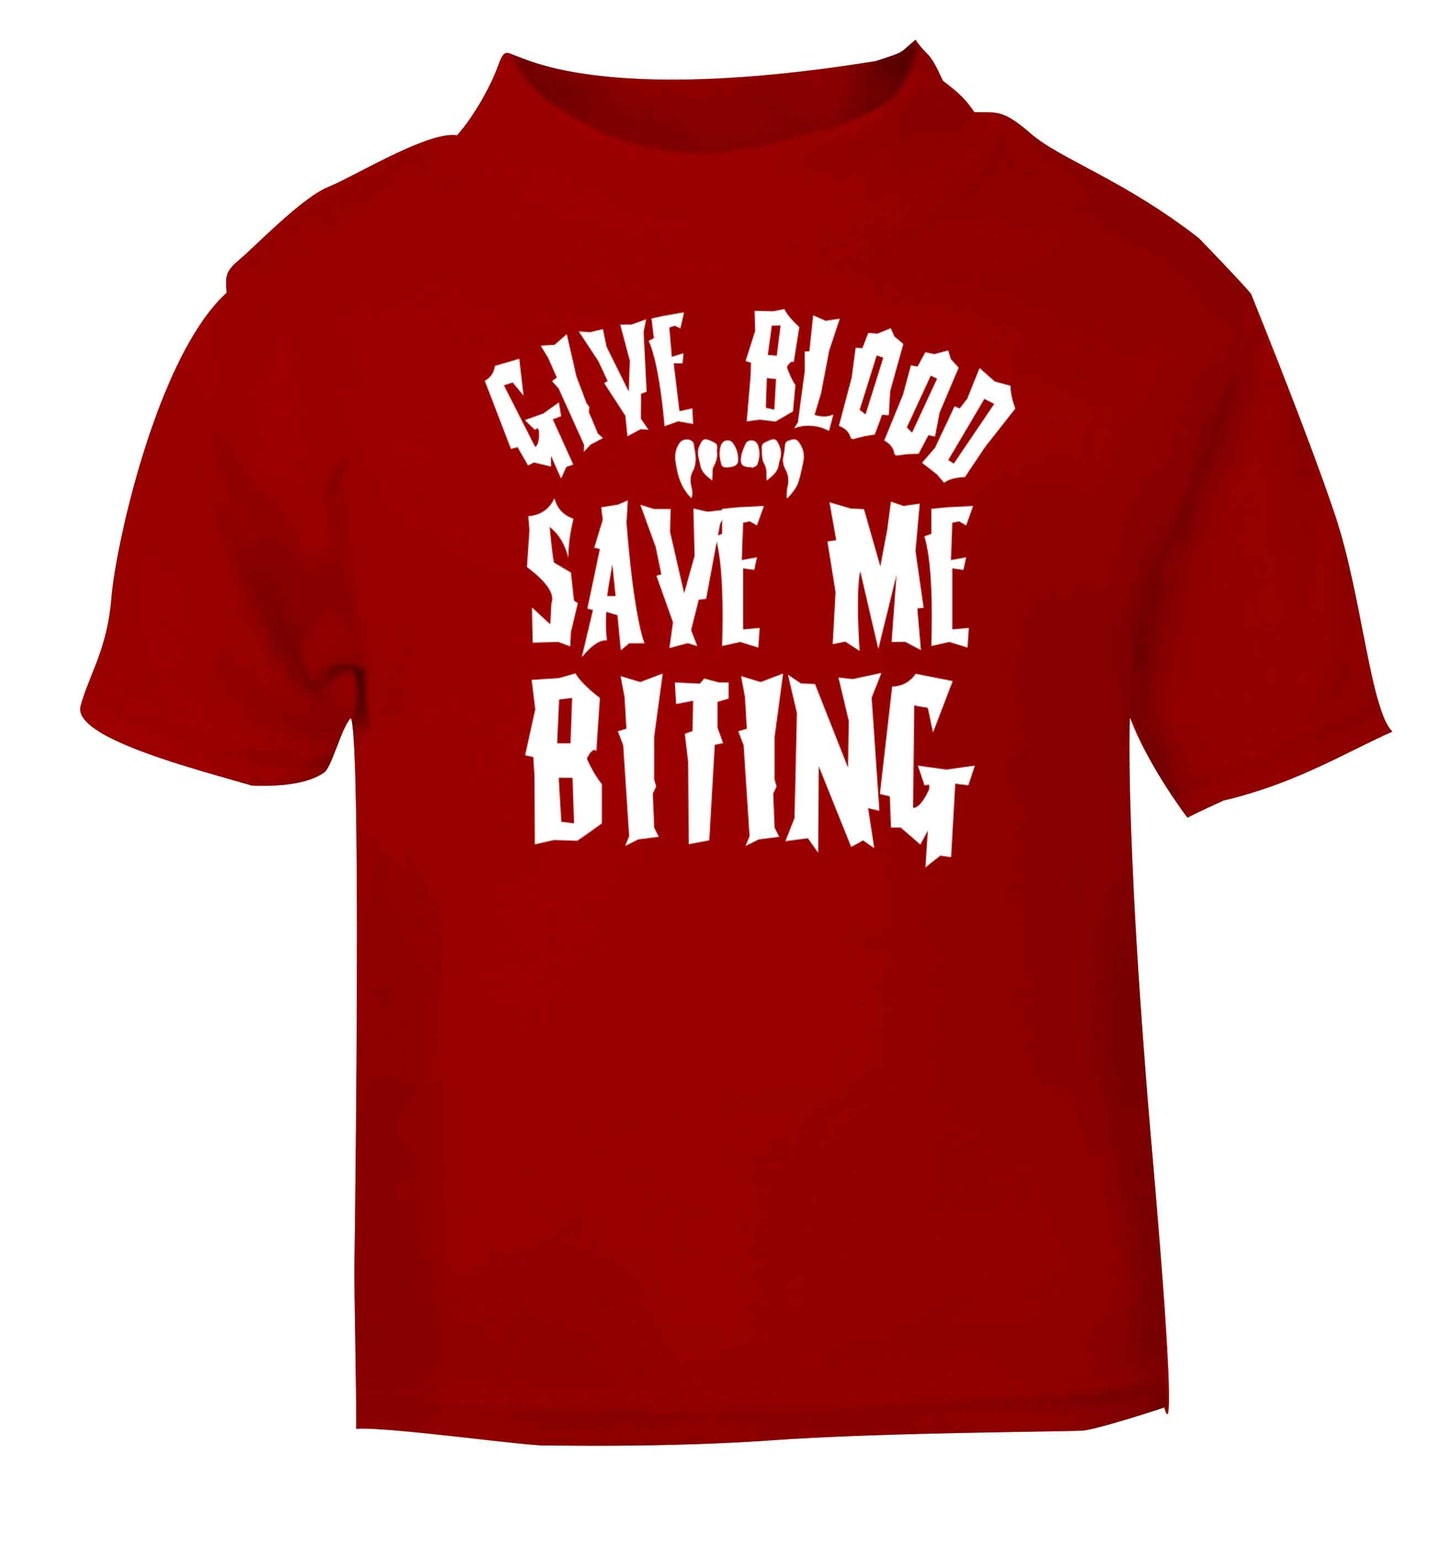 Give blood save me biting red baby toddler Tshirt 2 Years